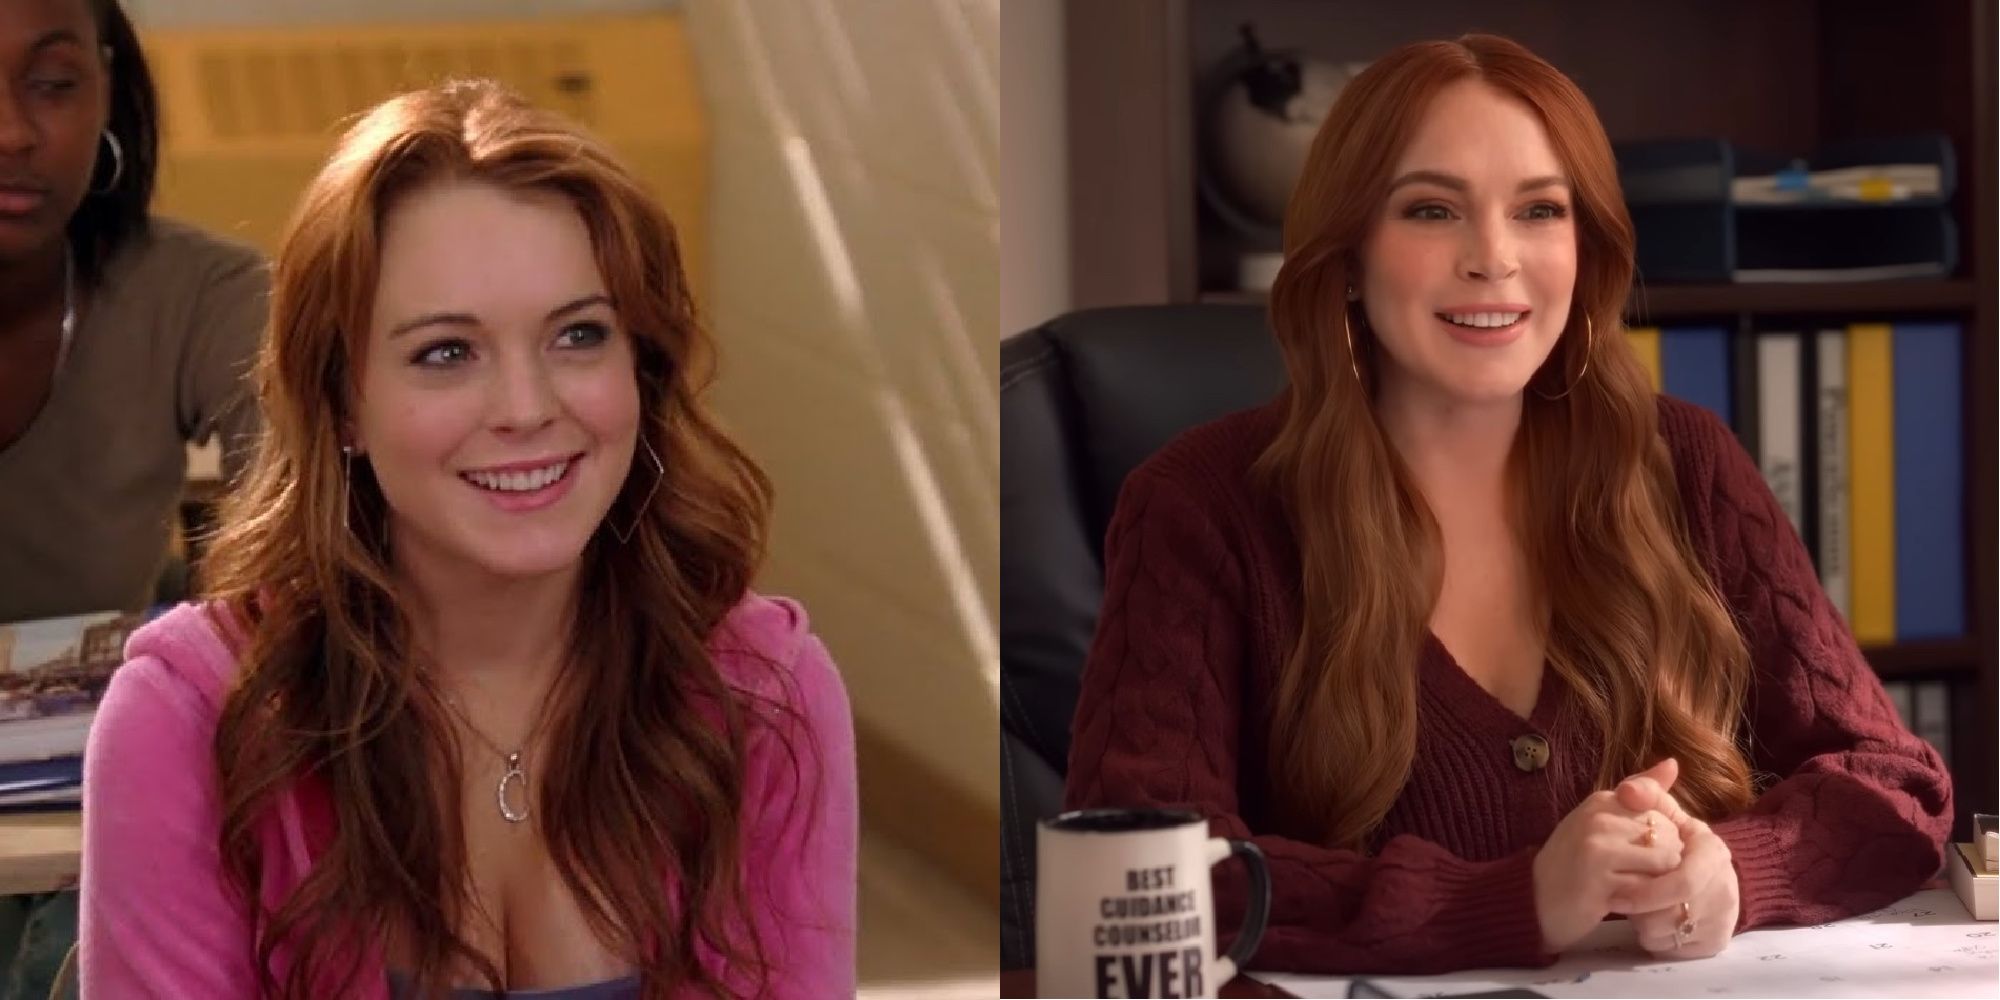 Watch Lindsay Lohan and Mean Girls Costars Reprise Their Roles